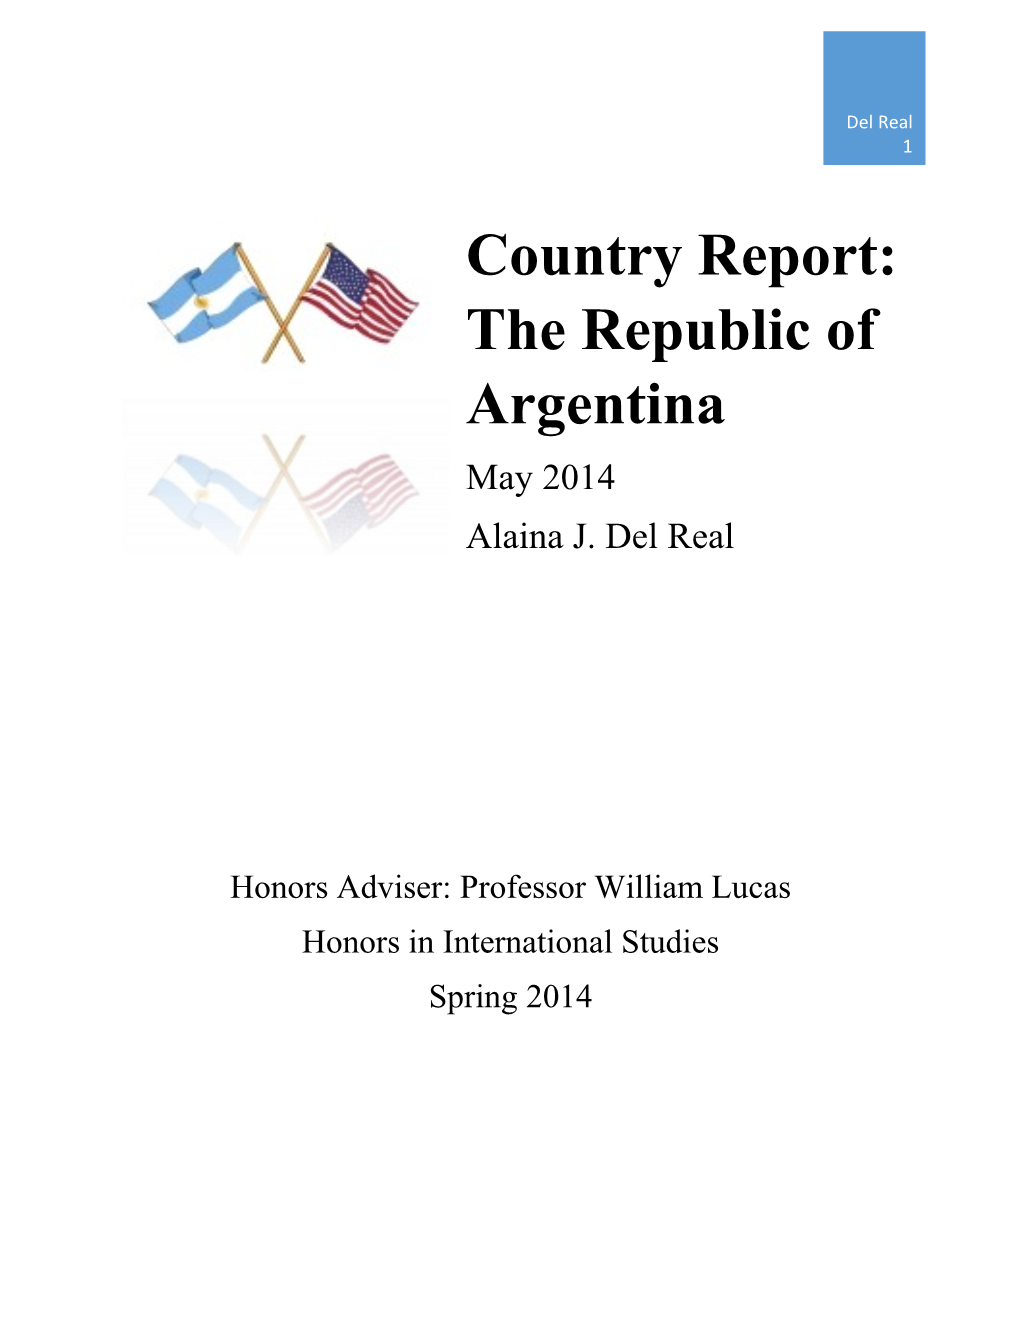 Country Report: the Republic of Argentina May 2014 Alaina J